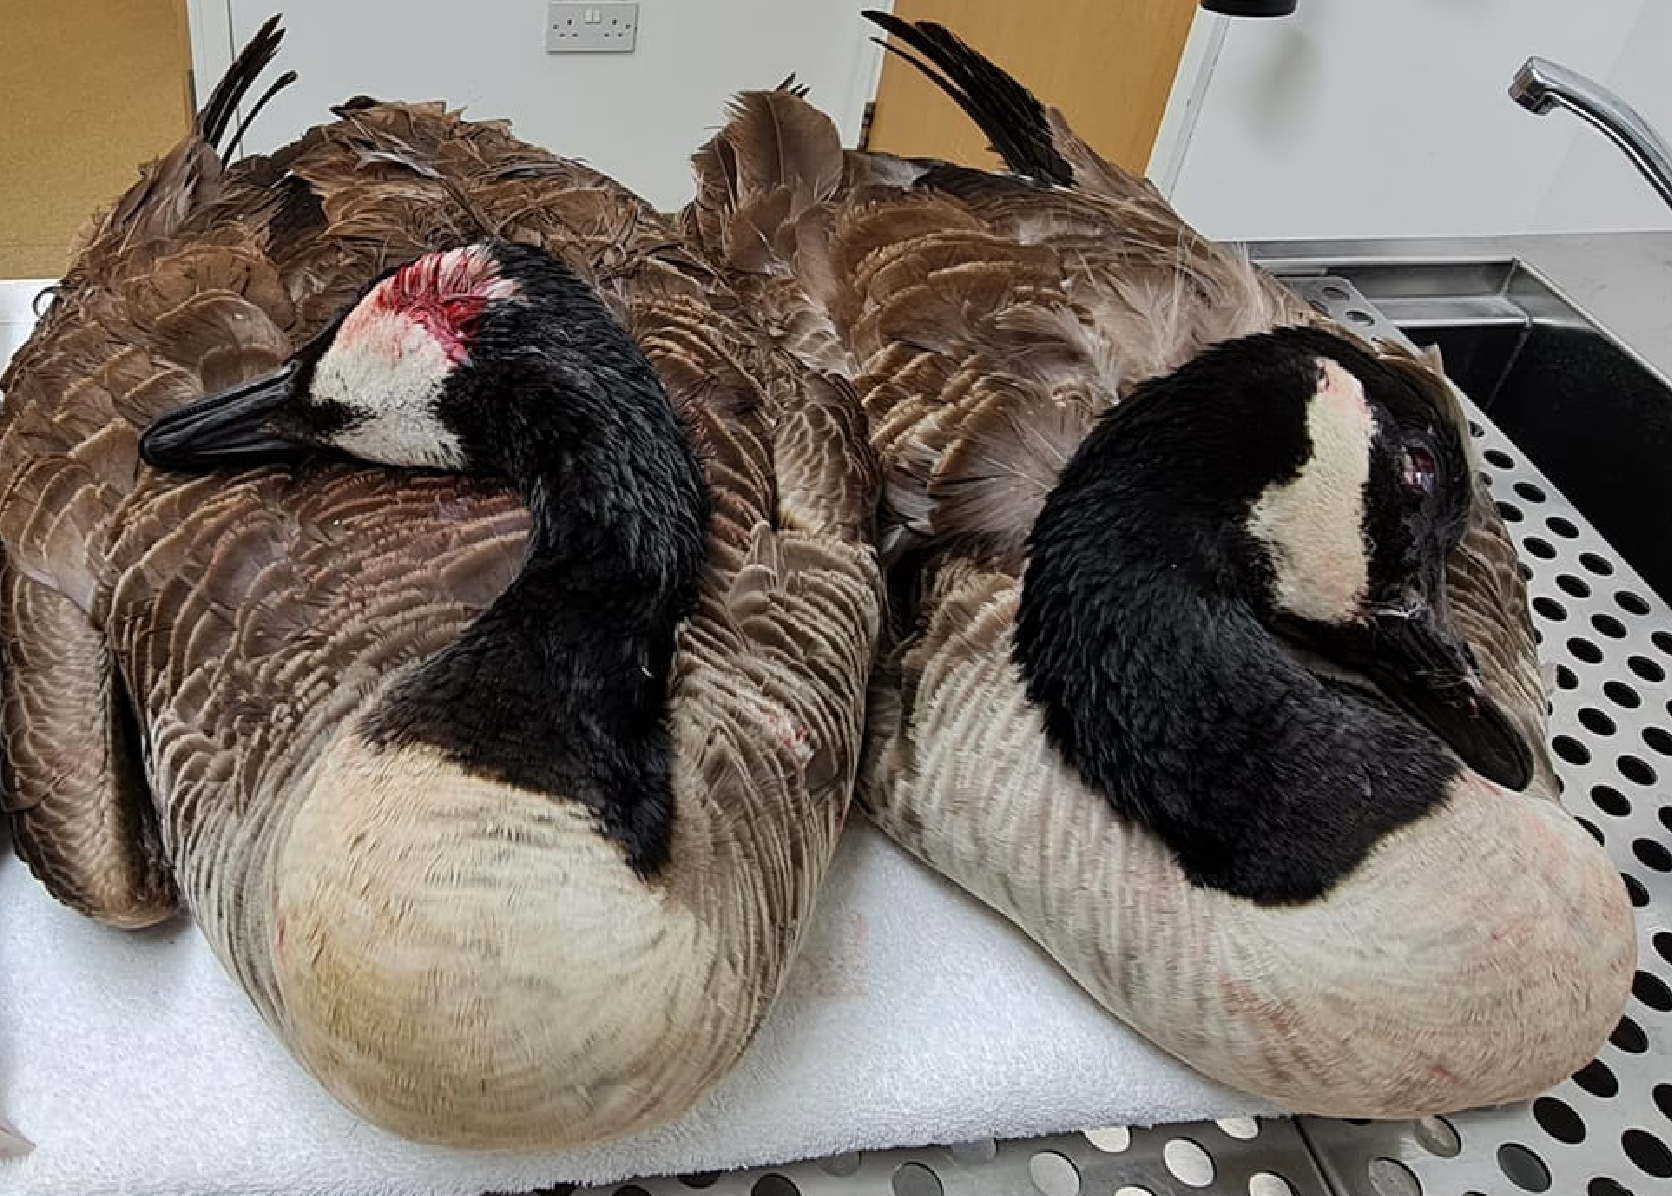 Two Canada Geese killed by thugs - Animal News